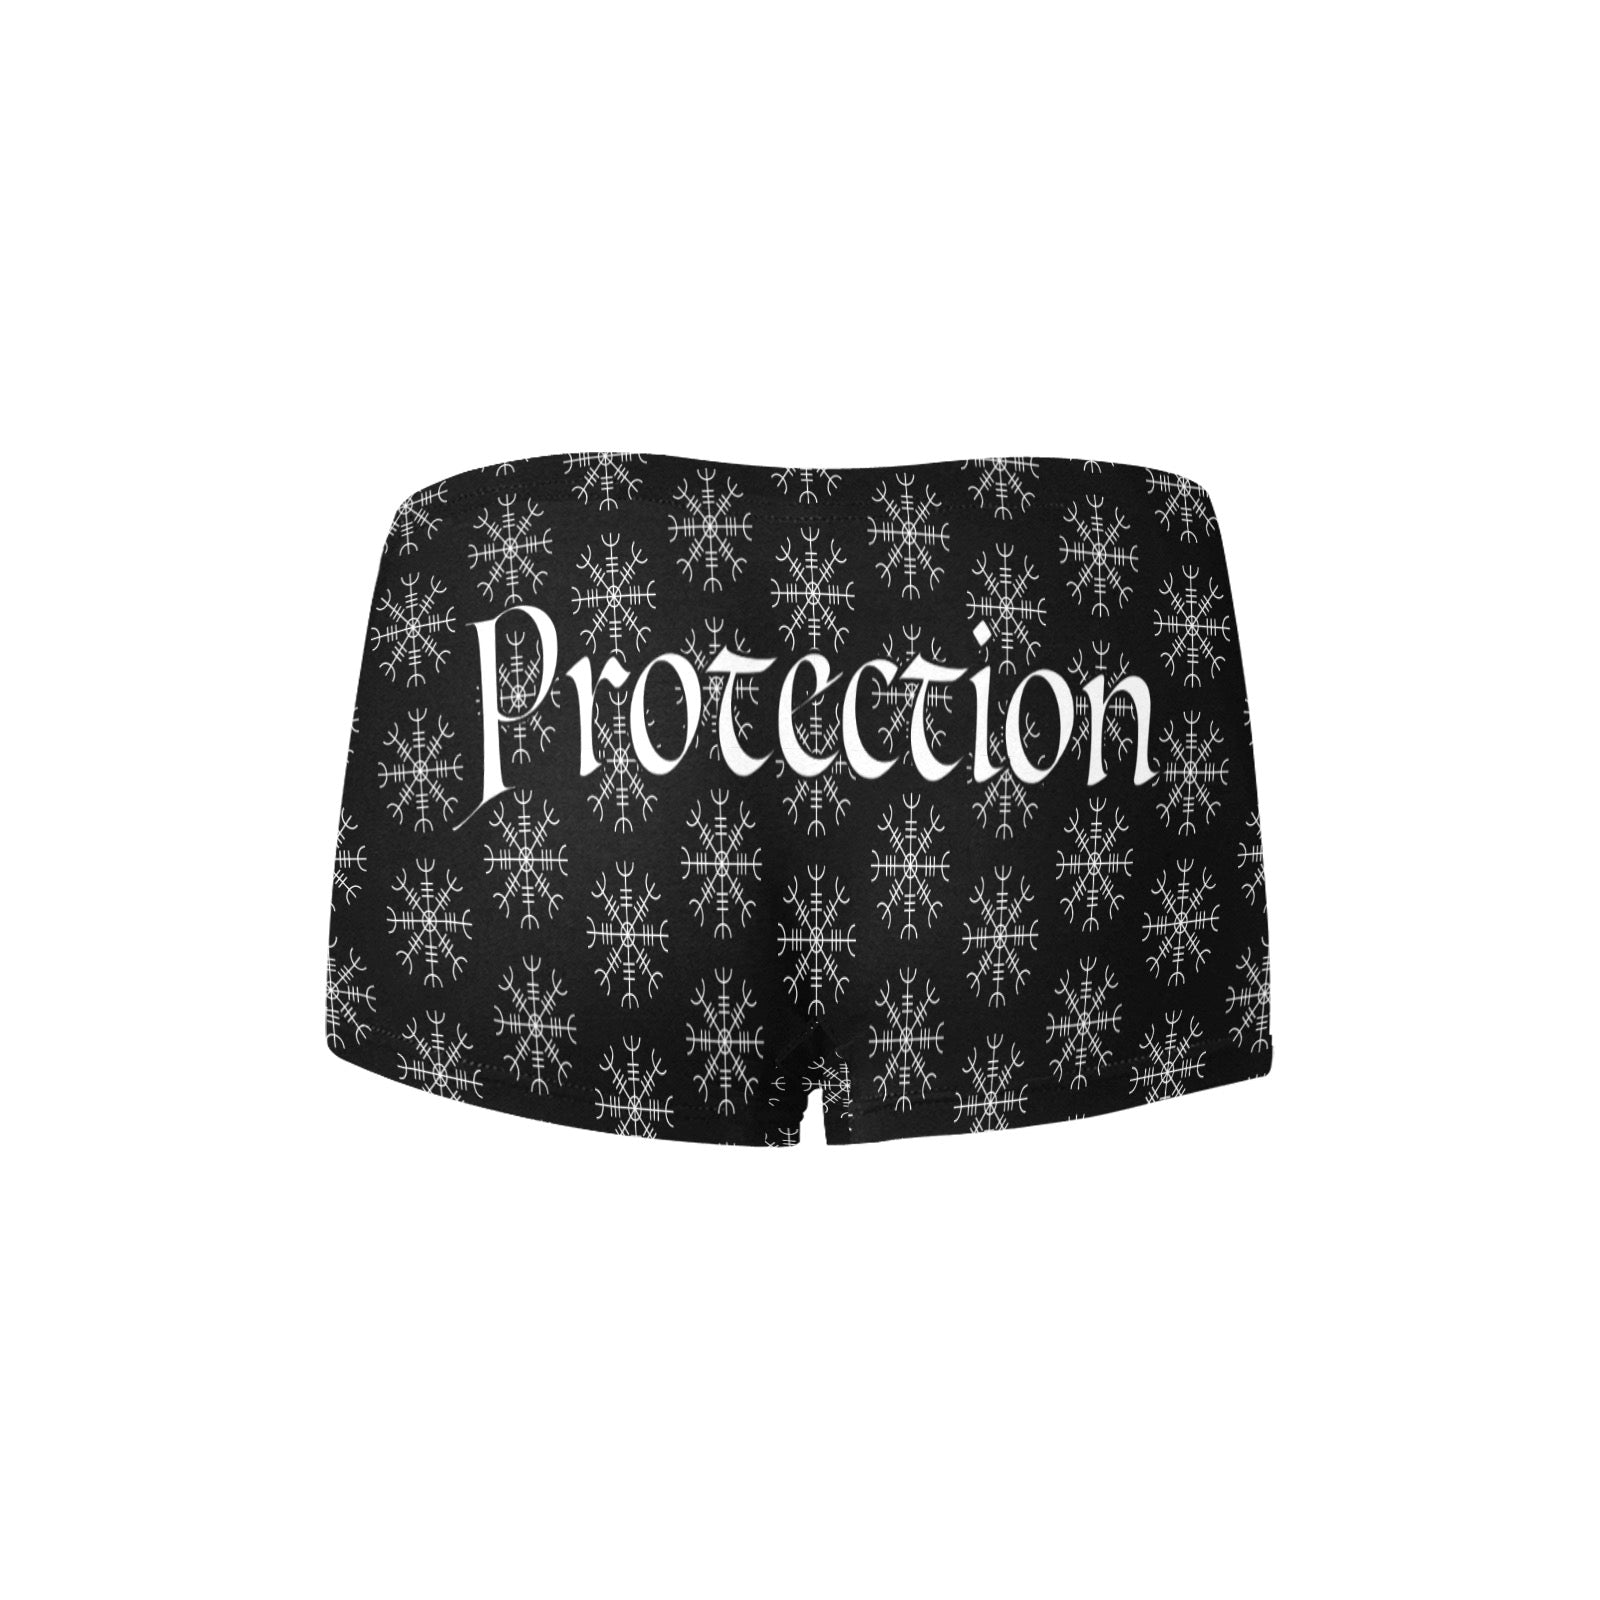 Patti's Power Panties Women's Boyshort Panty - "Protection" with "Helm of Awe" sigil in black (Product, back view)